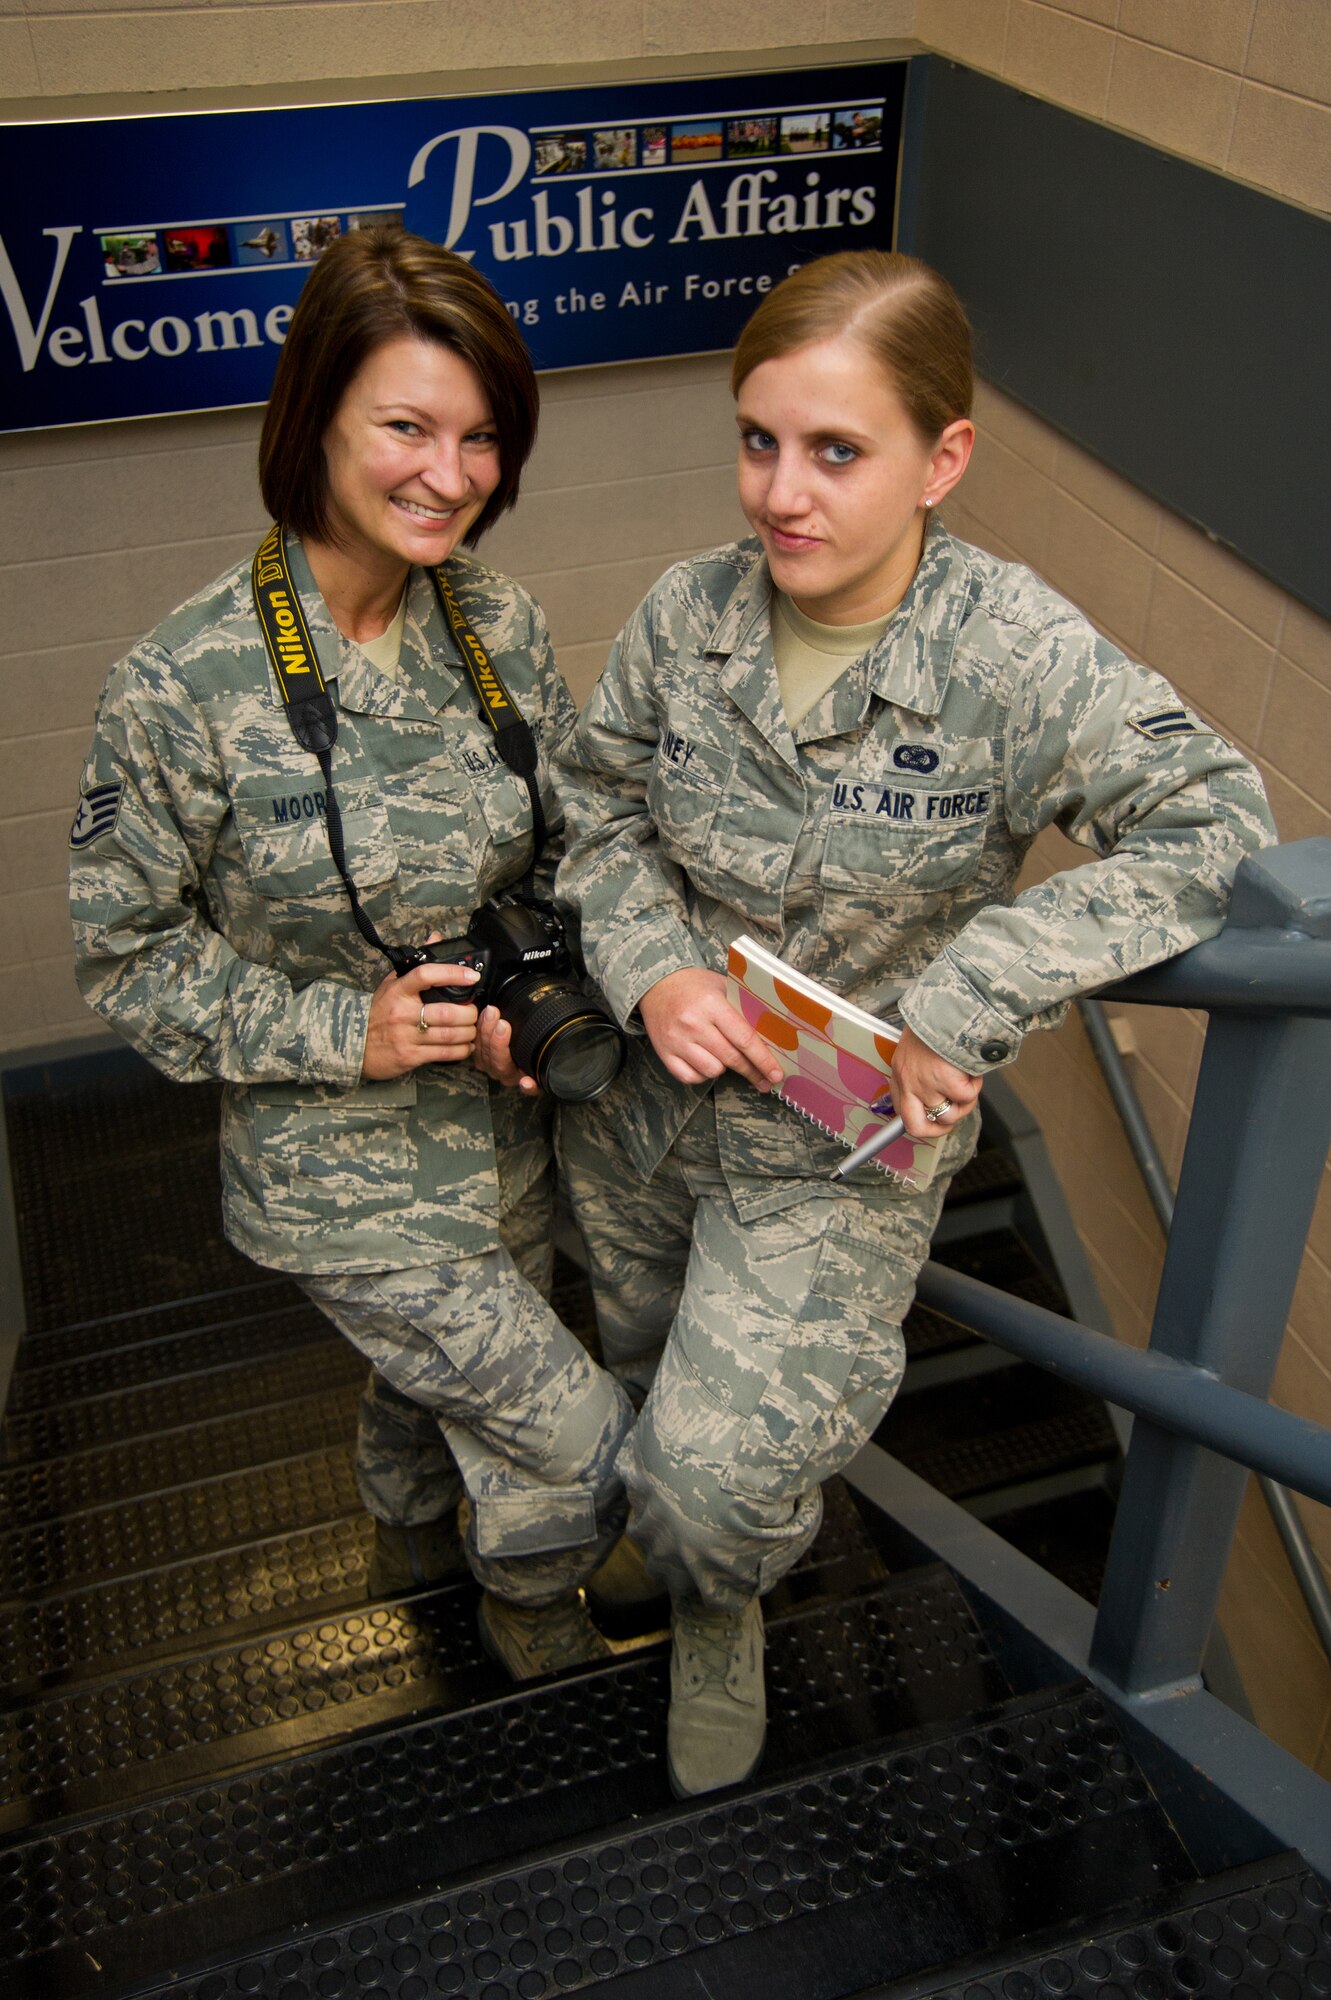 Staff Sgt. Kimberly Moore and Airman 1st Class Heather Heiney, 81st Training Wing Public Affairs, pose for a photo at Wall Studio, Keesler Air Force Base, Miss., Feb. 7, 2012.  Moore took top honors in the Air Education and Training Command’s 2011 Media Contest news photo category.  Heiney  is AETC’s print journalist of the year and also won first place in the commentary category.  (U.S. Air Force photo by Adam Bond)